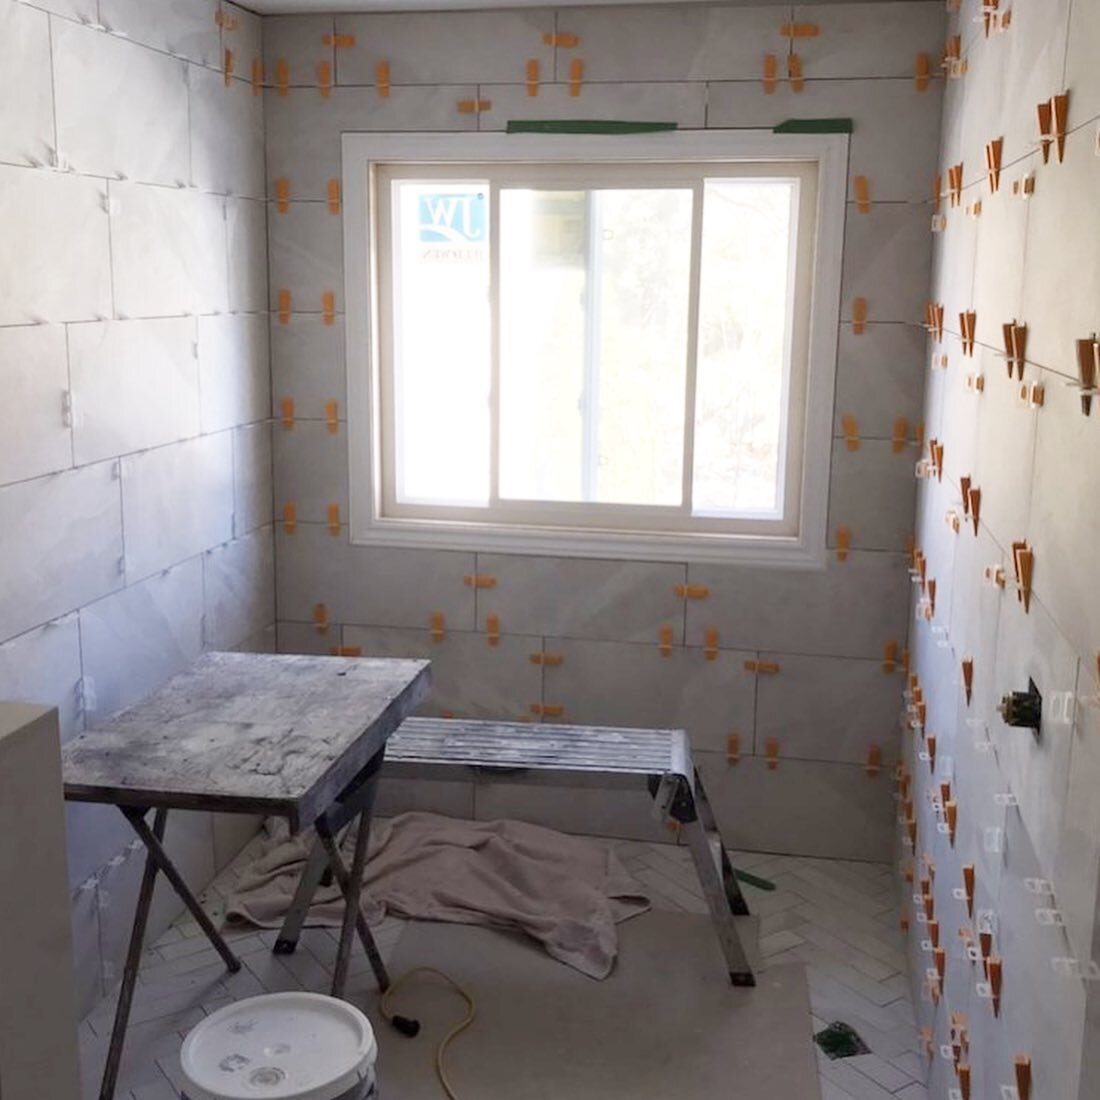 Lots of progress at our Deer Run project.
.
Shower room, hardwood matching, kitchen cabinets and a large skylight will fill the home with sunshine.
.
All in a days work.
.
.
.
#homesweethome #homerenovation #custominstall #homeaddition #burlingtonont